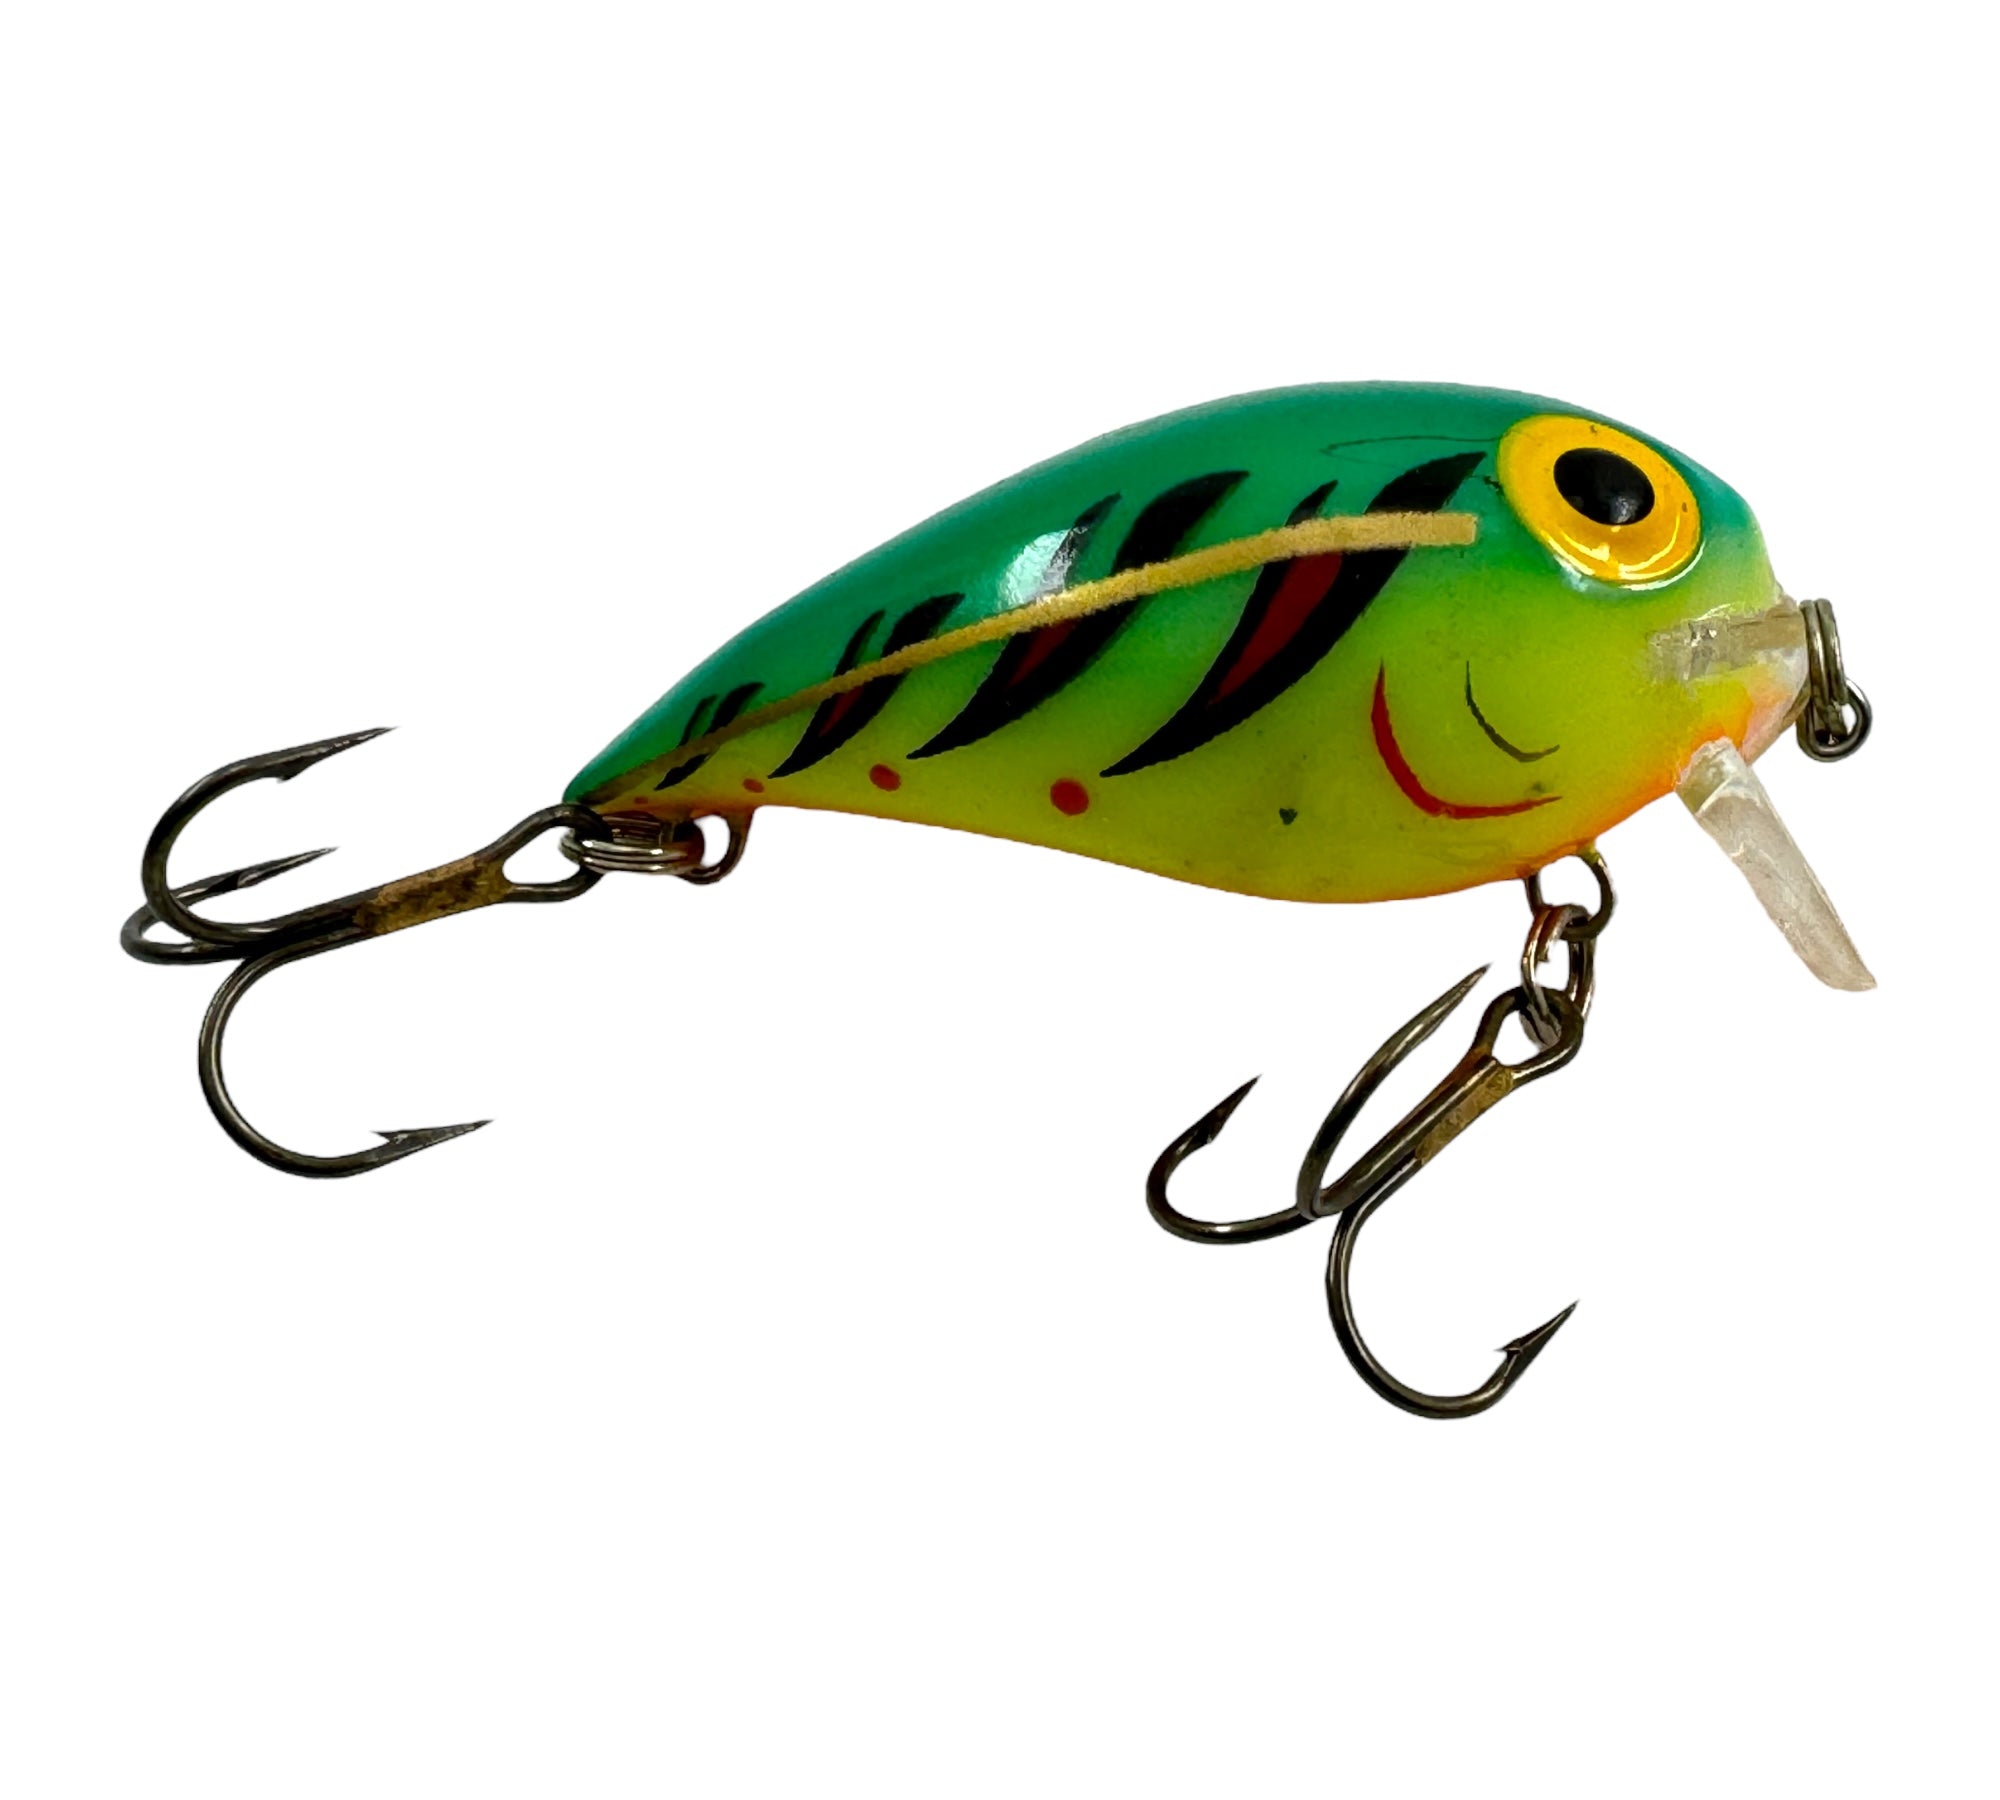 STORM LURES SUBWART 5 Fishing Lure • #SUBW05 374 HOT TIGER – Toad